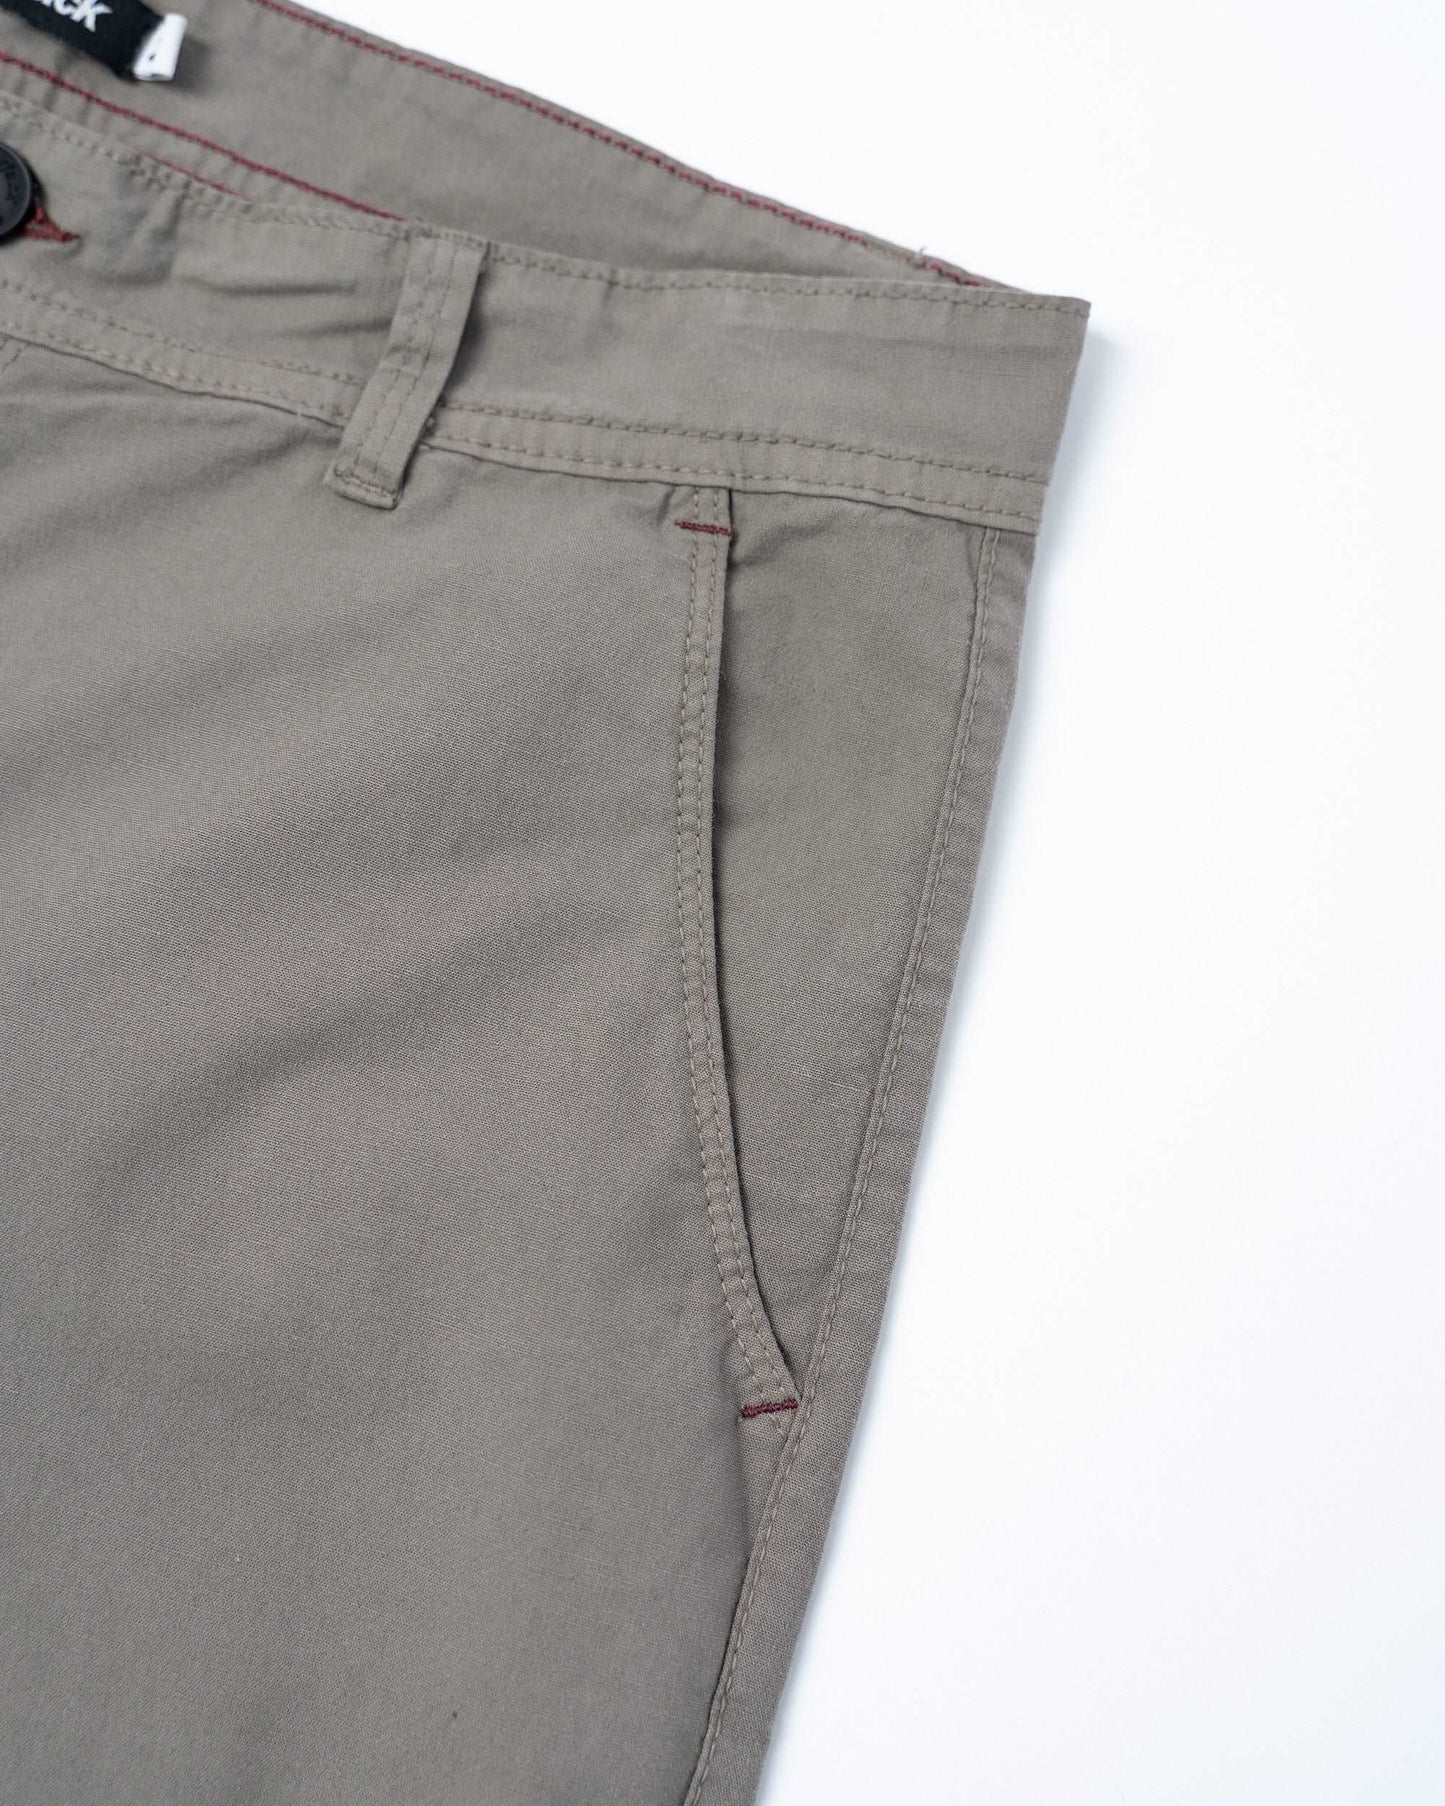 Chino Drill Pants Gris Stone